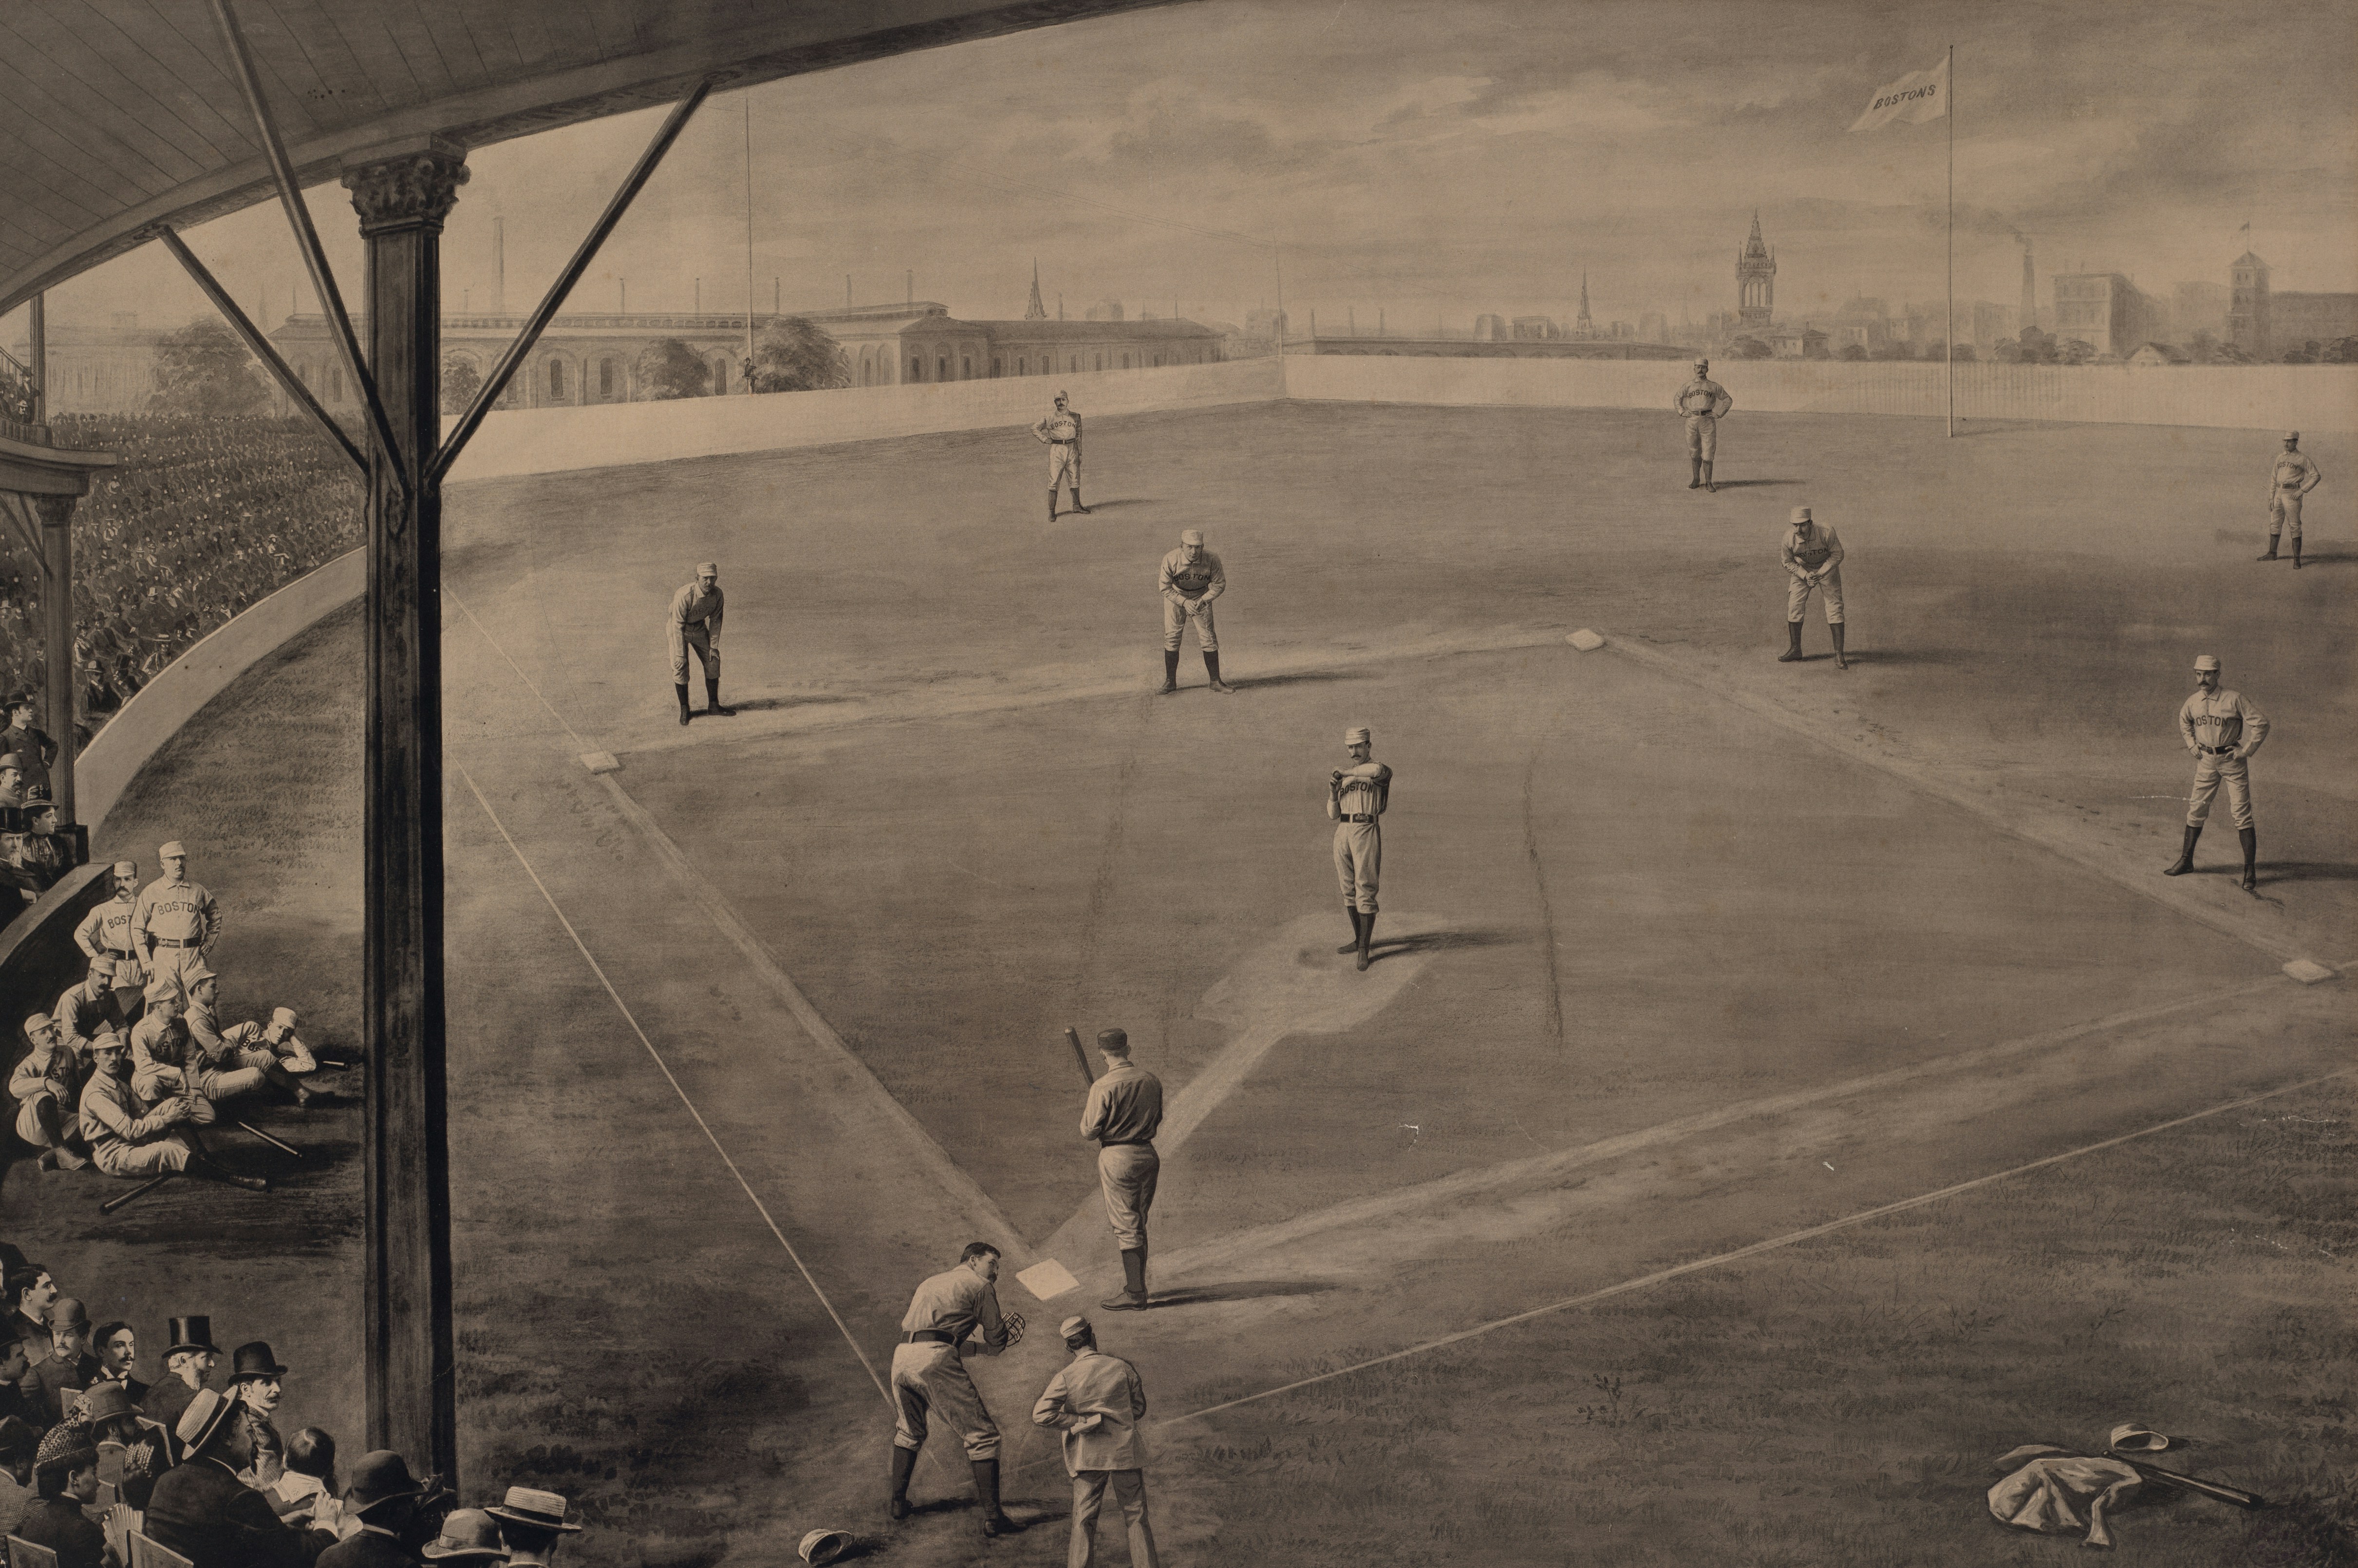 Depiction by George H. Hastings of a game at the South End Grounds between the Boston Nationals and the New York Giants. The artist used reproductions from original images to depict the players on the field, in foul ground, and some of the spectators, presumably prominent people. 1888 https://ark.digitalcommonwealth.org/ark:/50959/sf2688720 Please visit Digital Commonwealth to view more images: https://www.digitalcommonwealth.org.